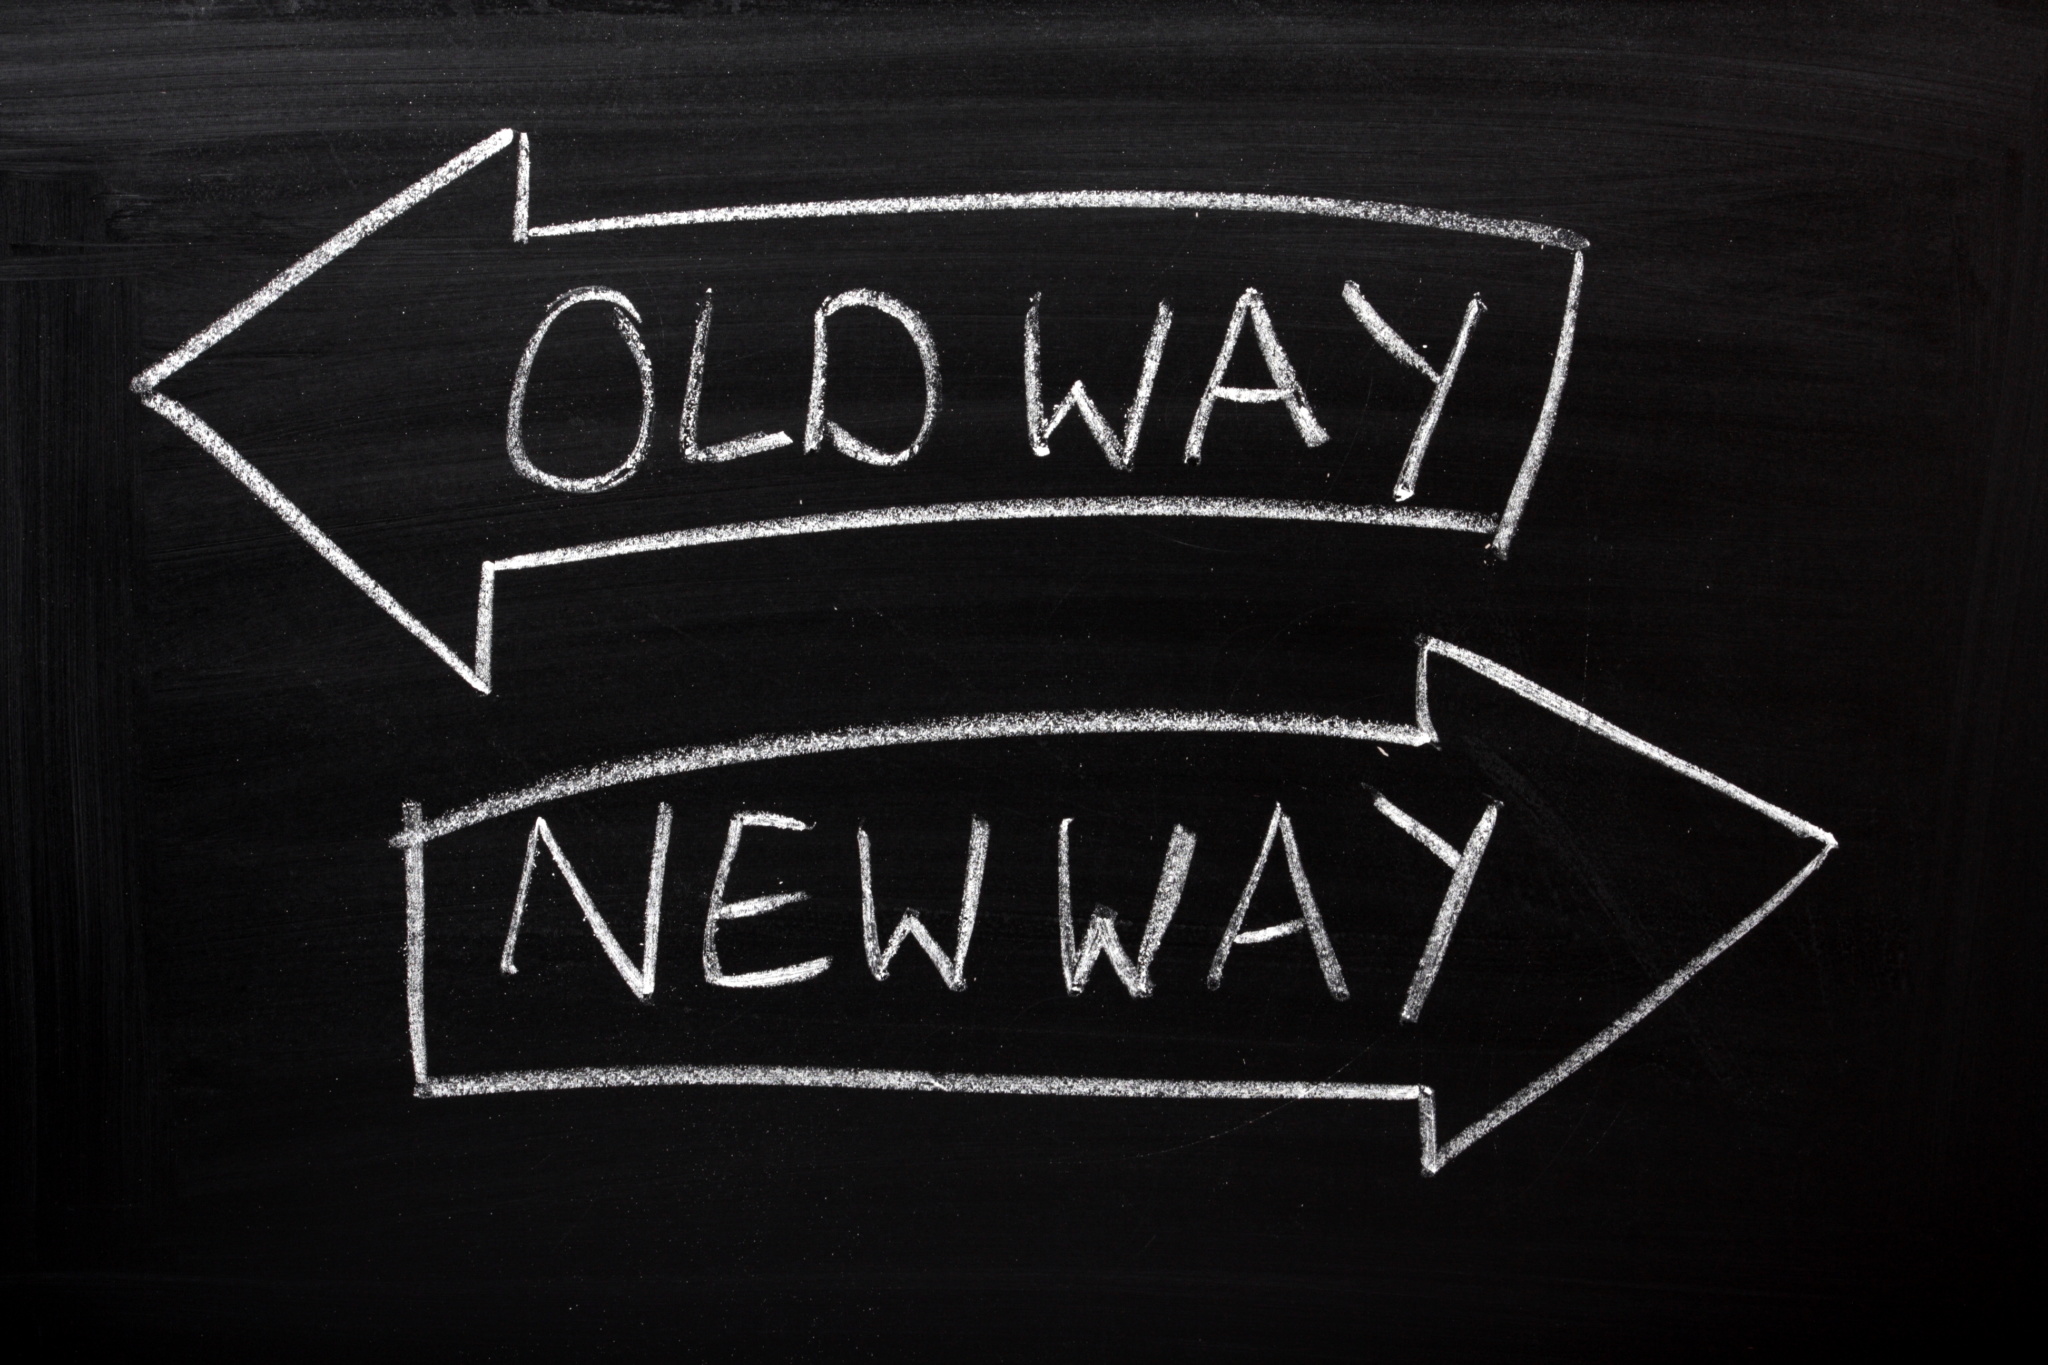 From the Old Way to the New Way: how a wellbeing economy will respond